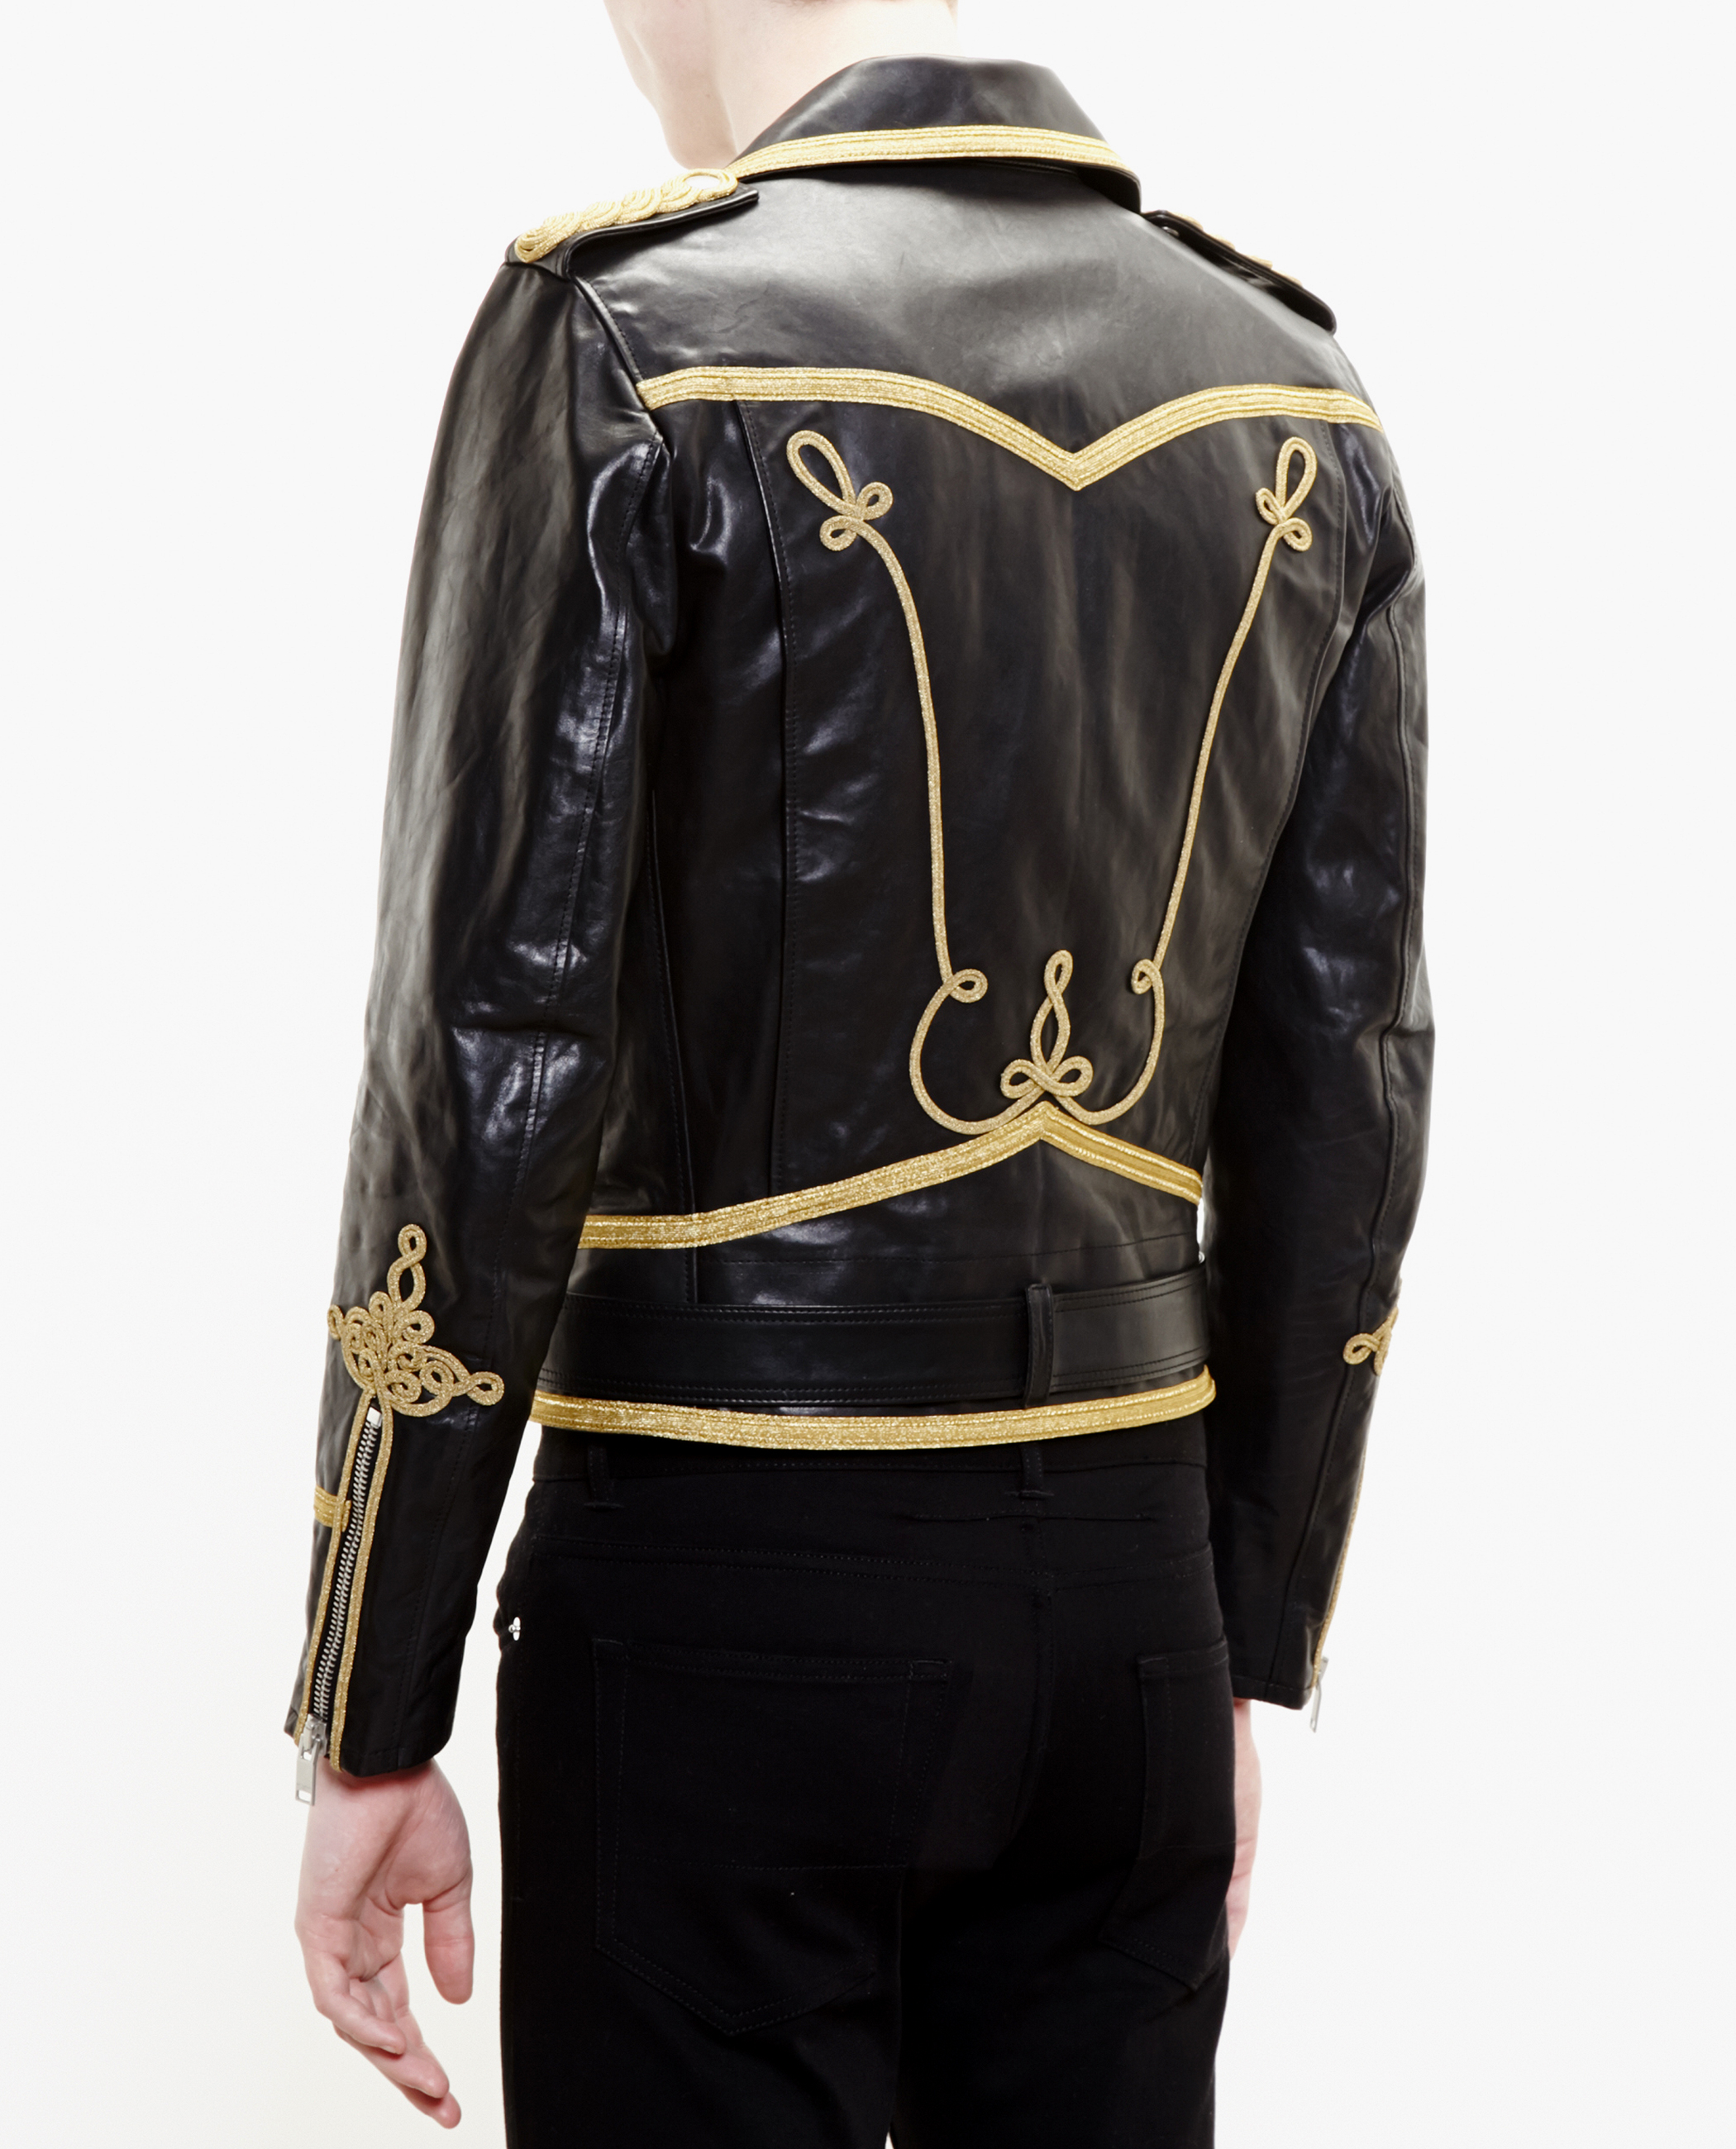 Lyst - Saint Laurent Leather Jacket With Gold-Tone Piping in Metallic ...